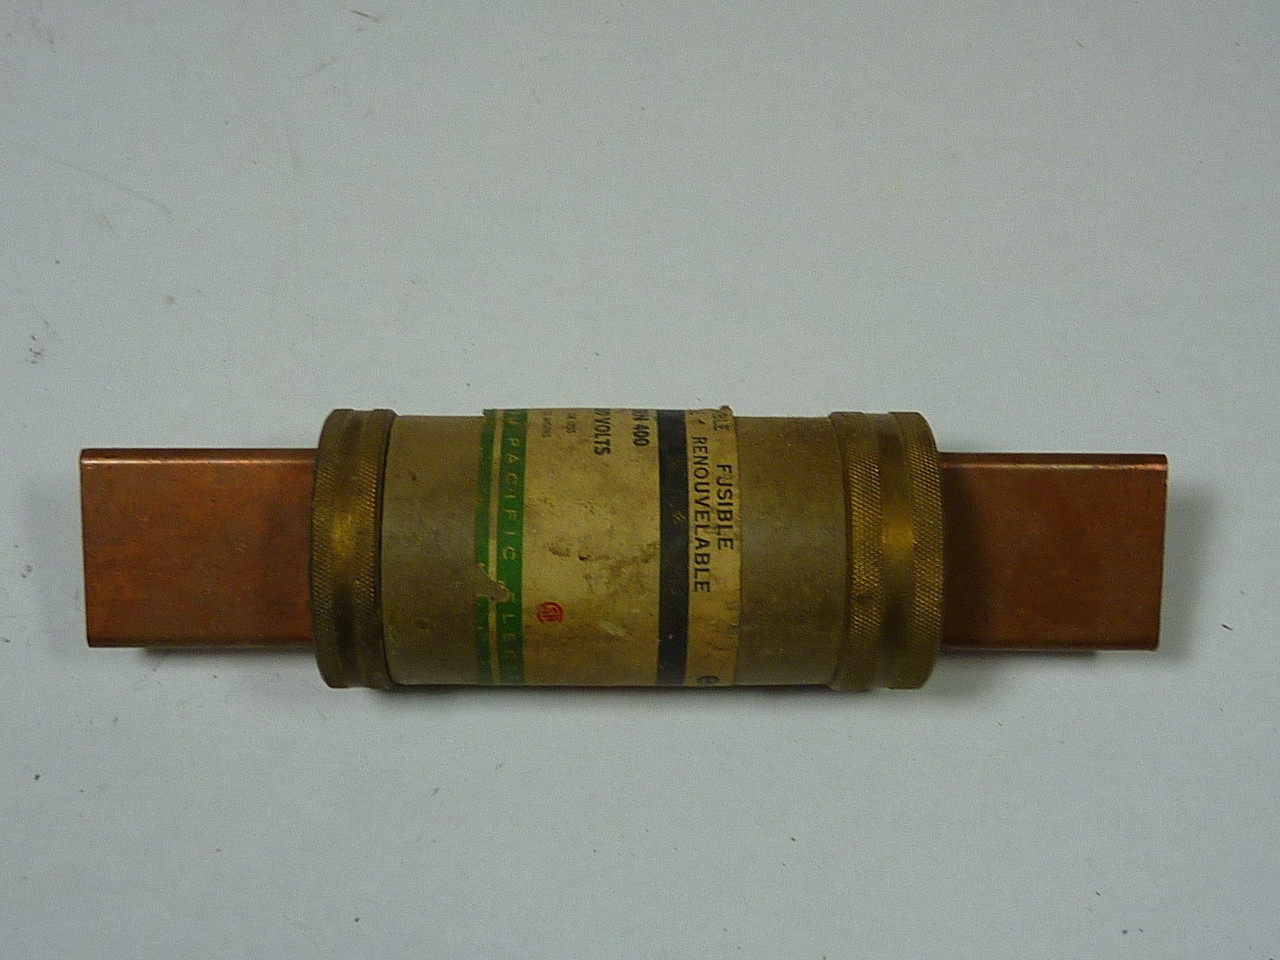 Federal Pacific ERN-400 Renewable Fuse 400A 250V USED